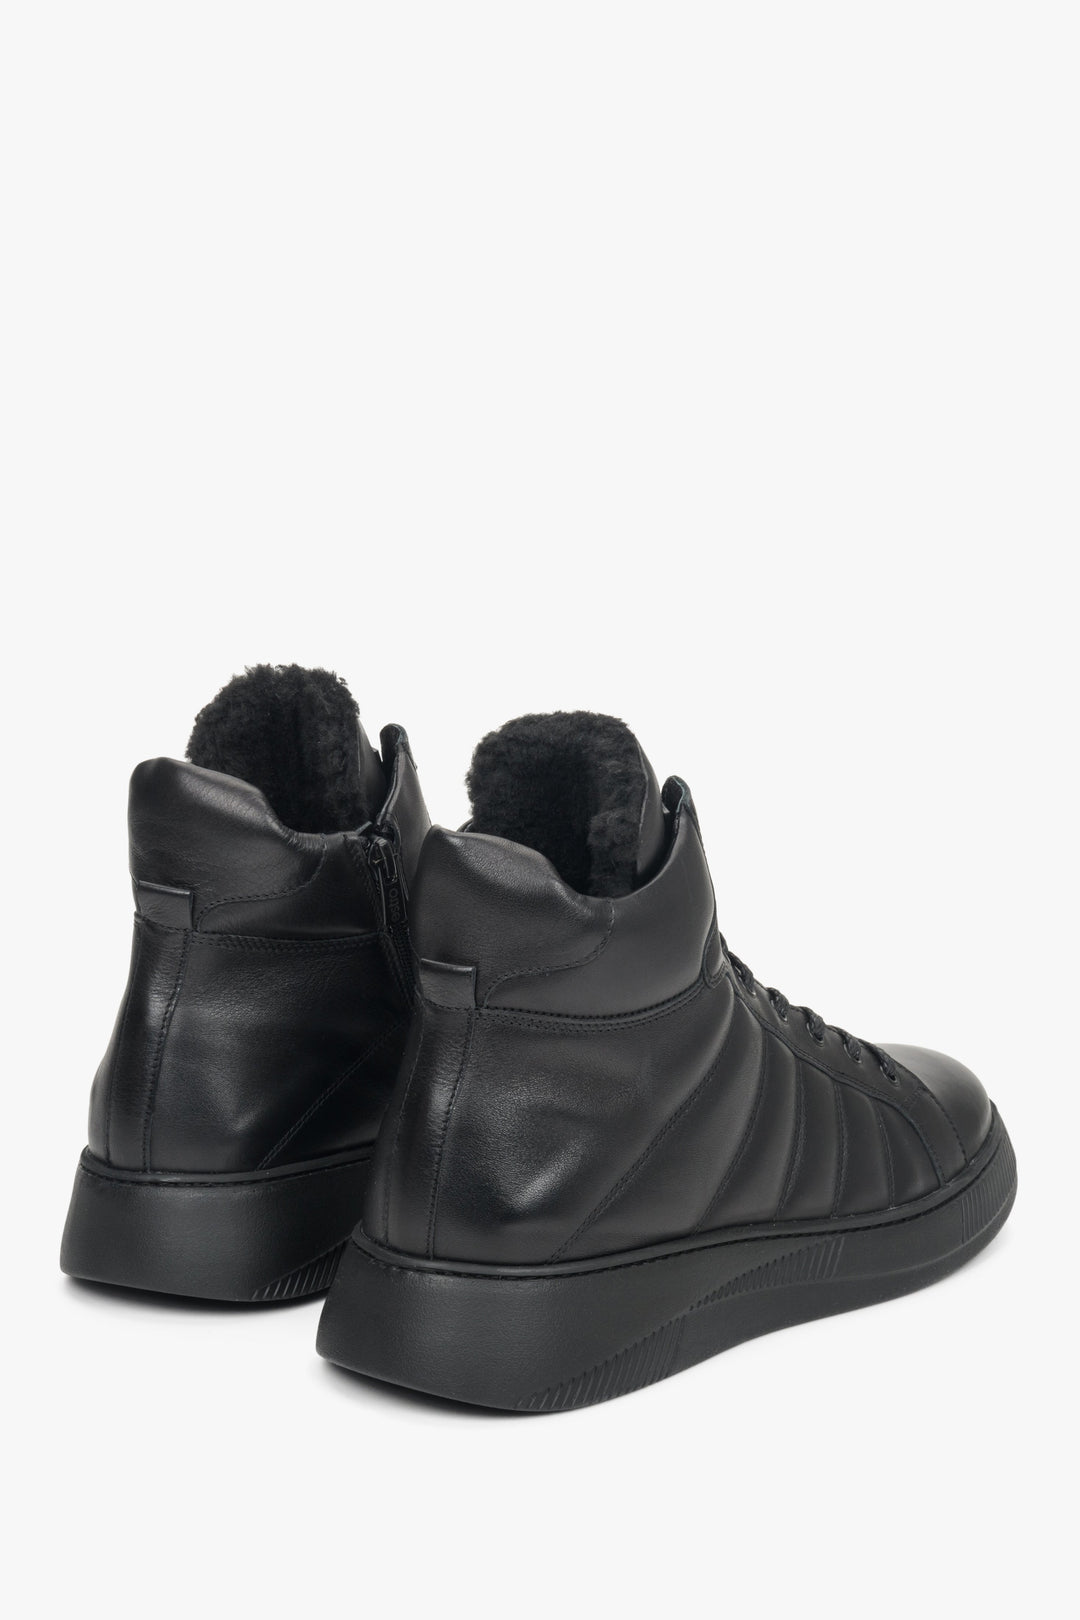 Estro men's black winter boots - the back of the upper and the sole of the shoe.